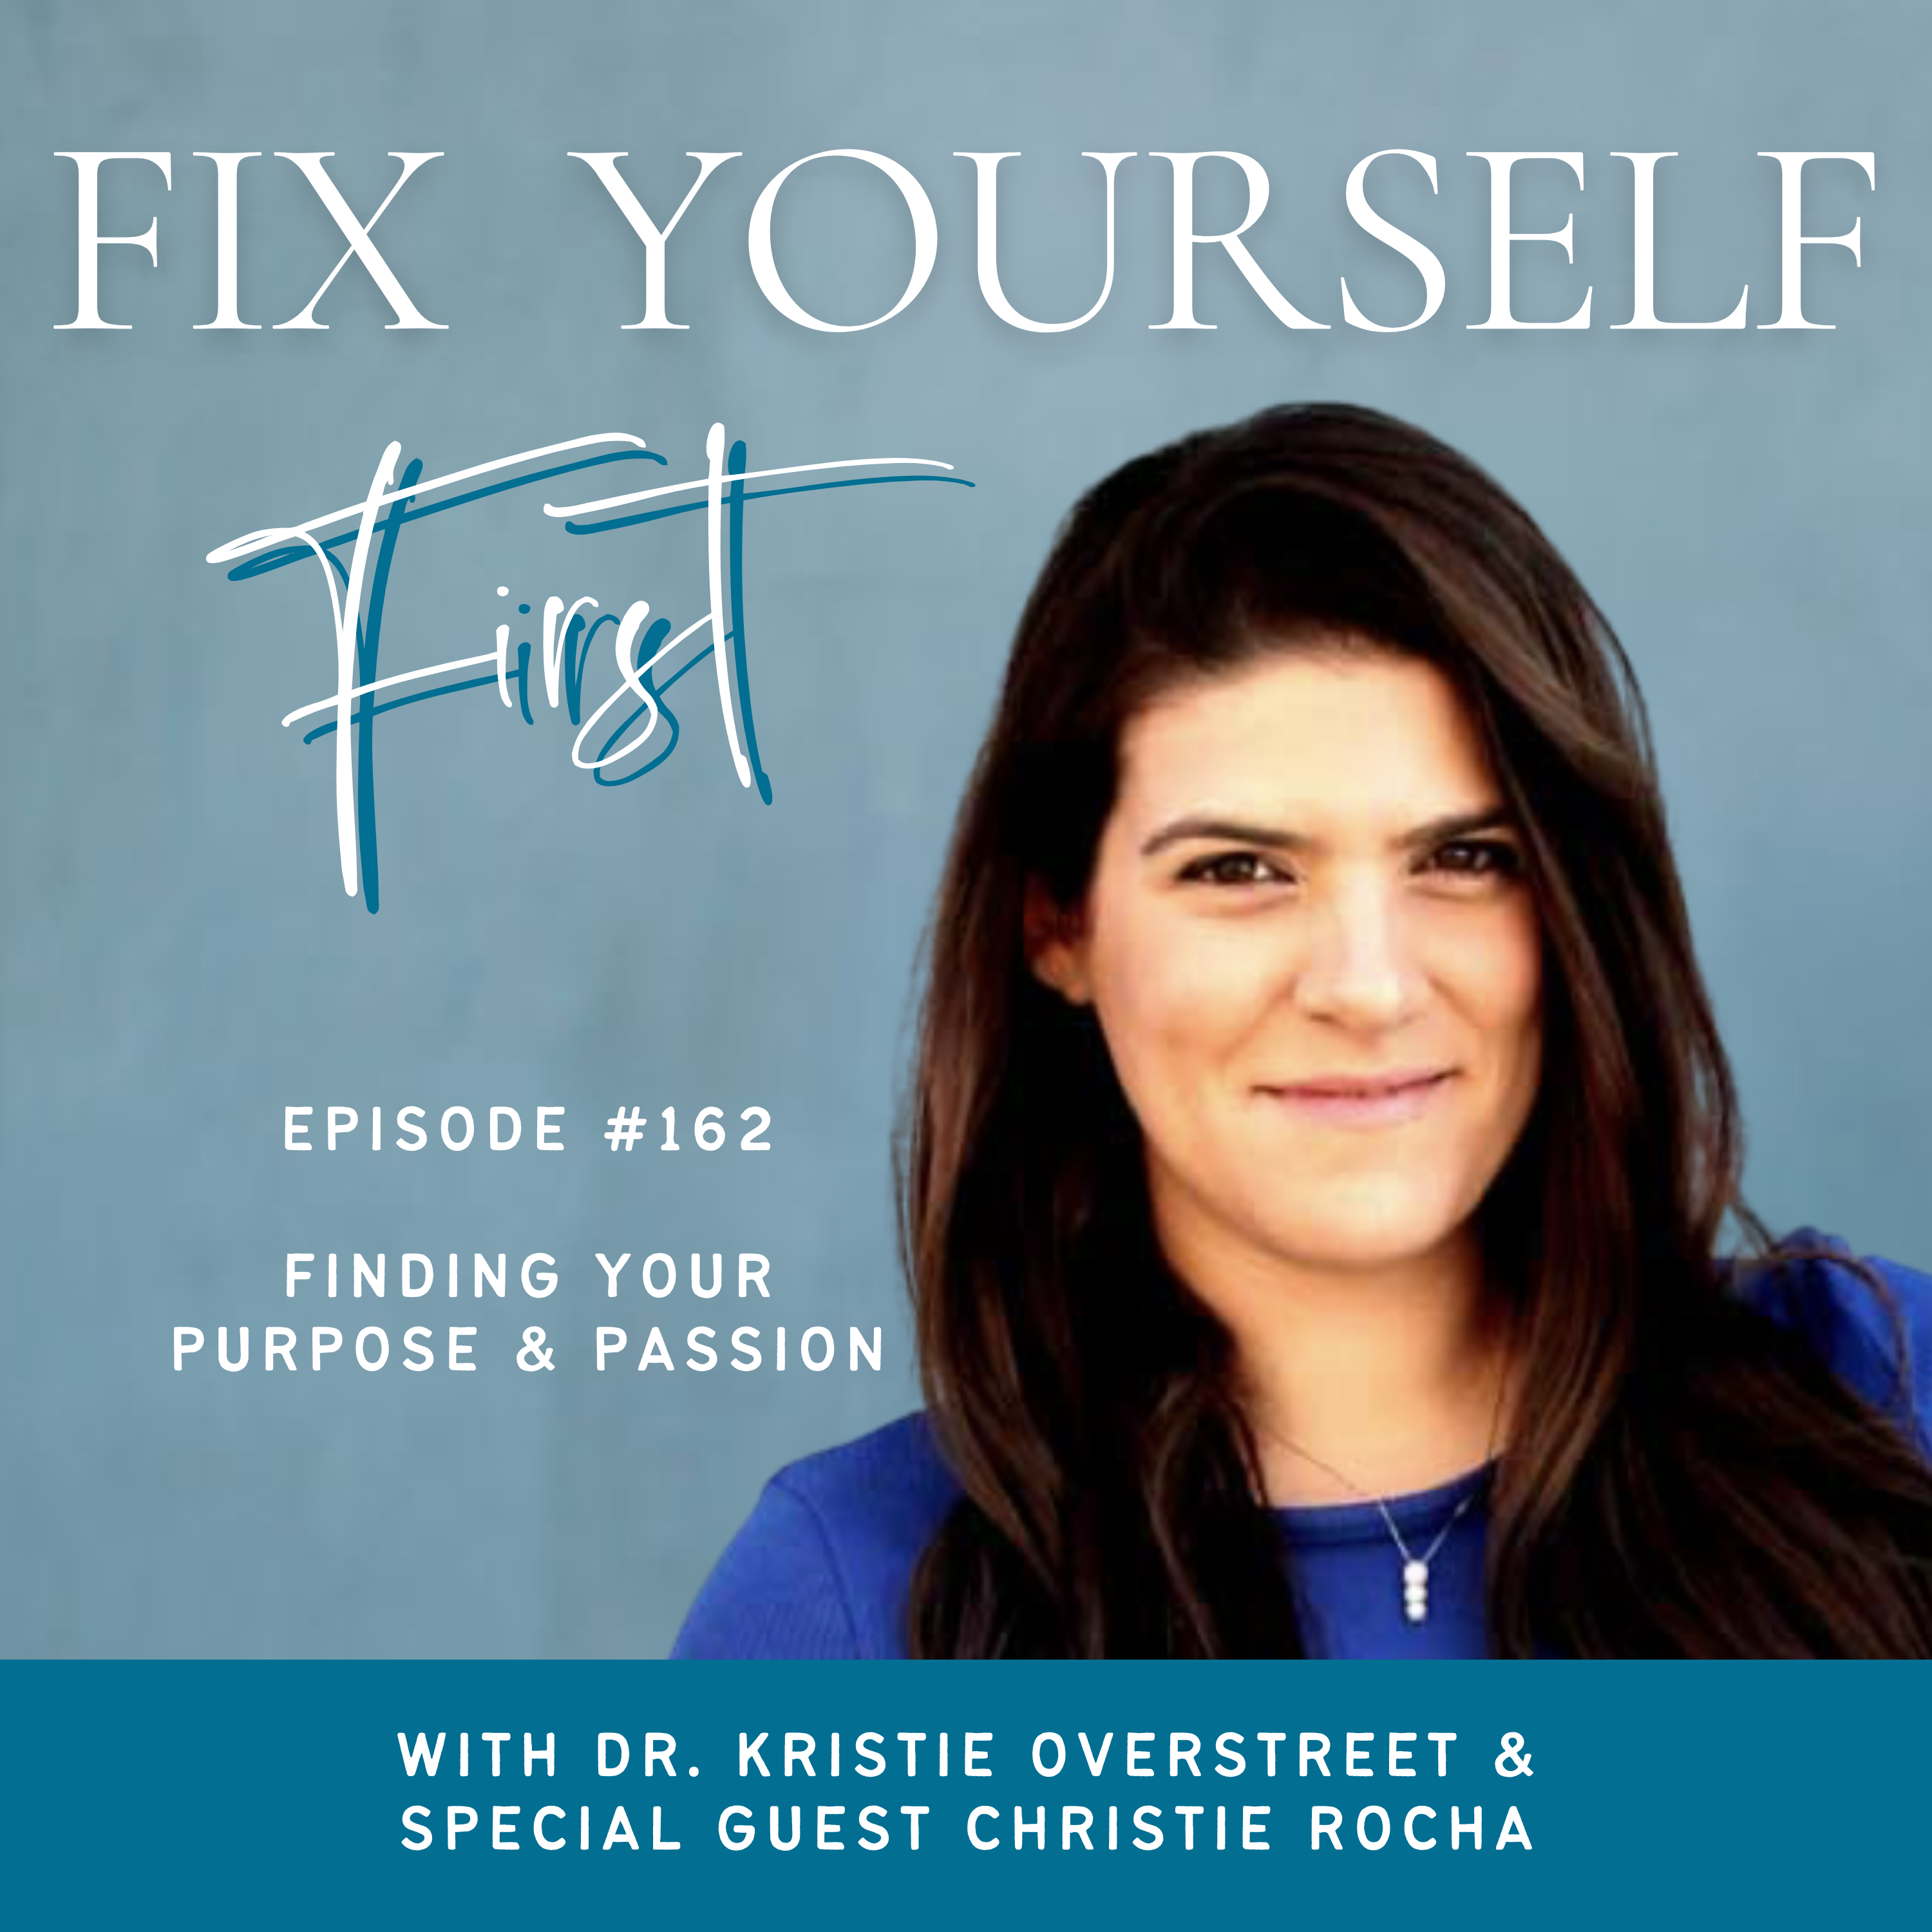 Fix Yourself First Episode 162 Finding Your Purpose & Passion with Christie Rocha